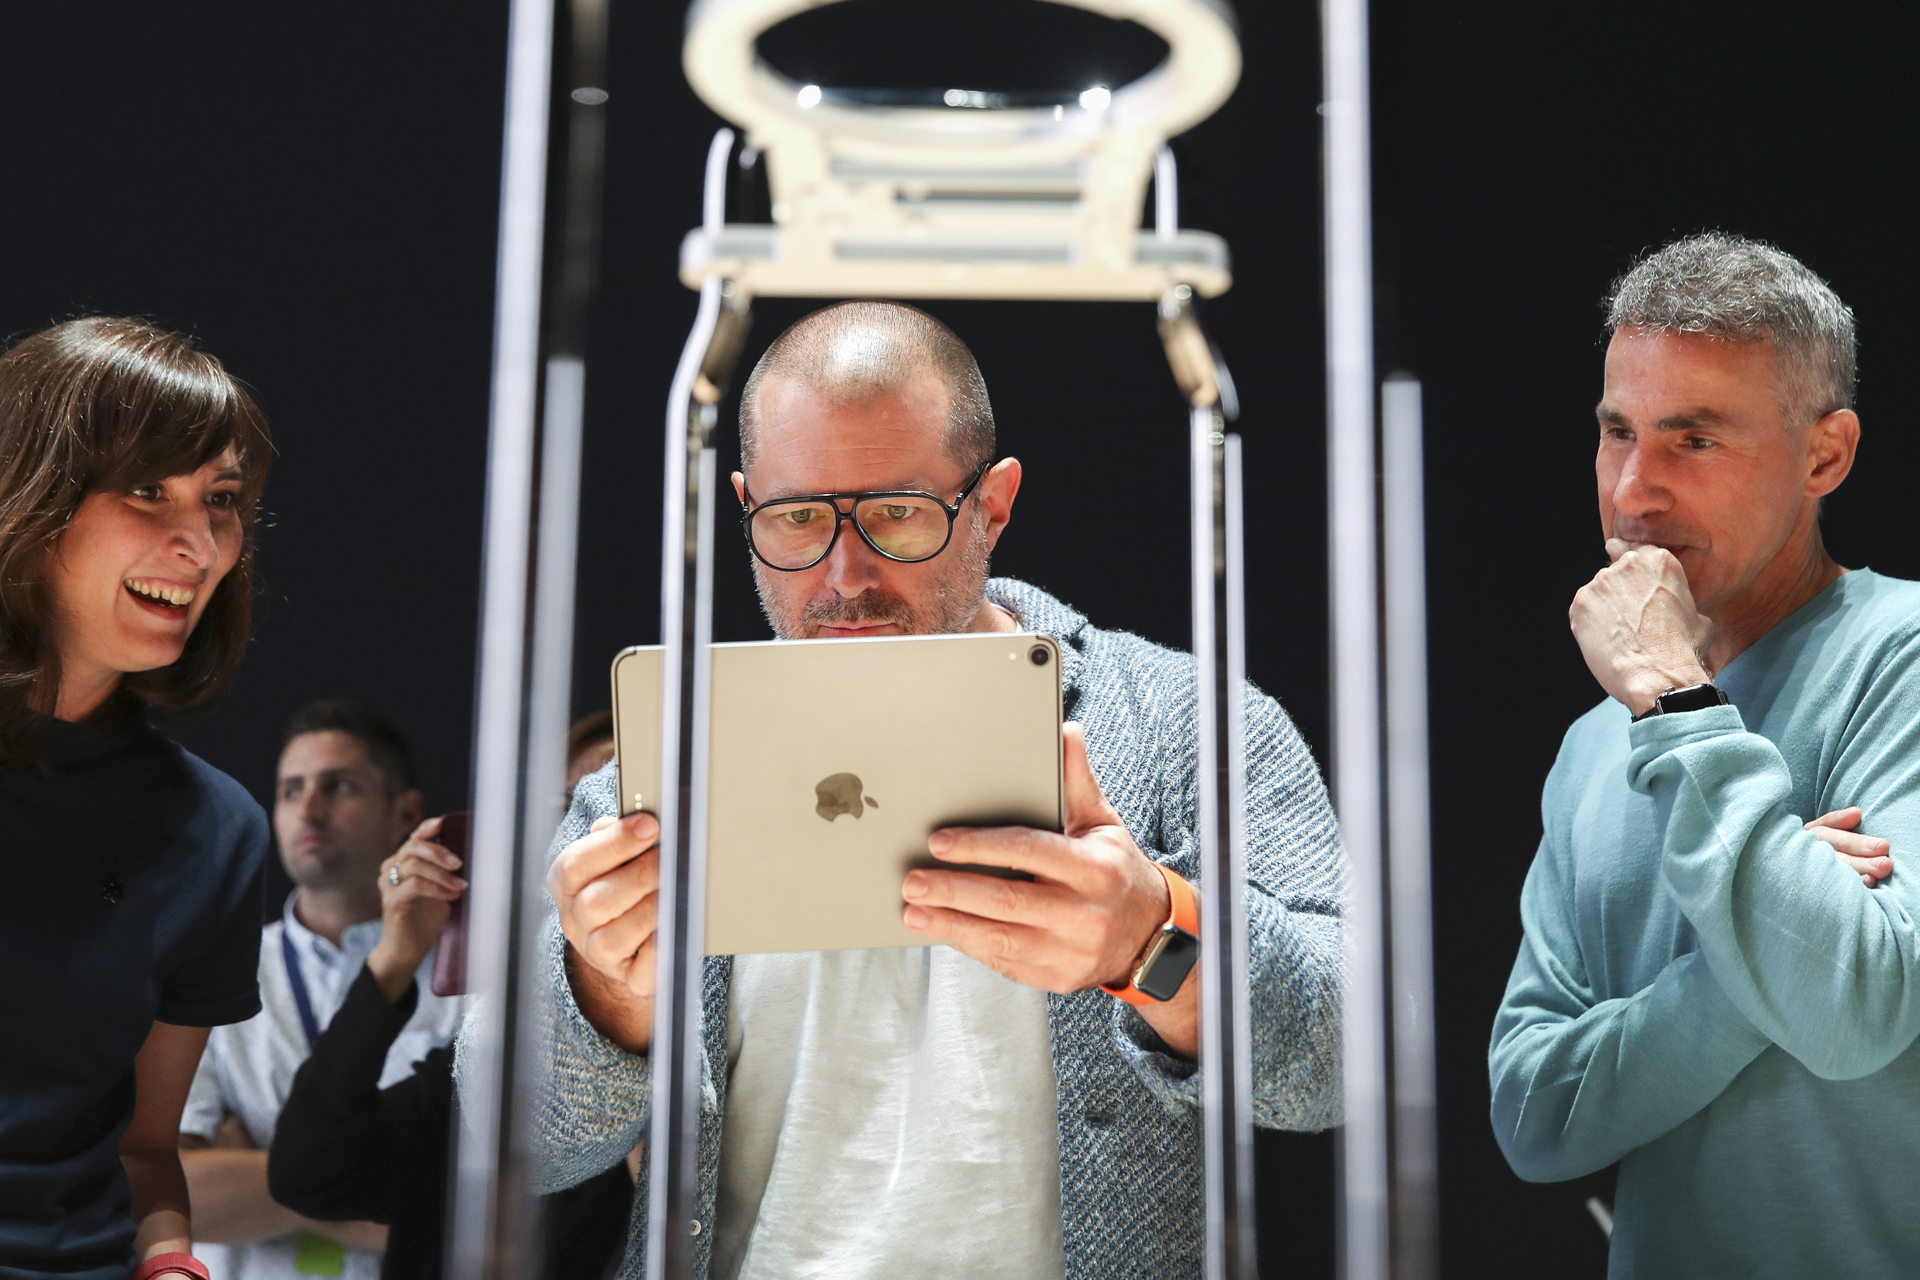 Apple chief design officer Jony Ive (middle) tests out a product at the 2019 Apple Worldwide Developer Conference.